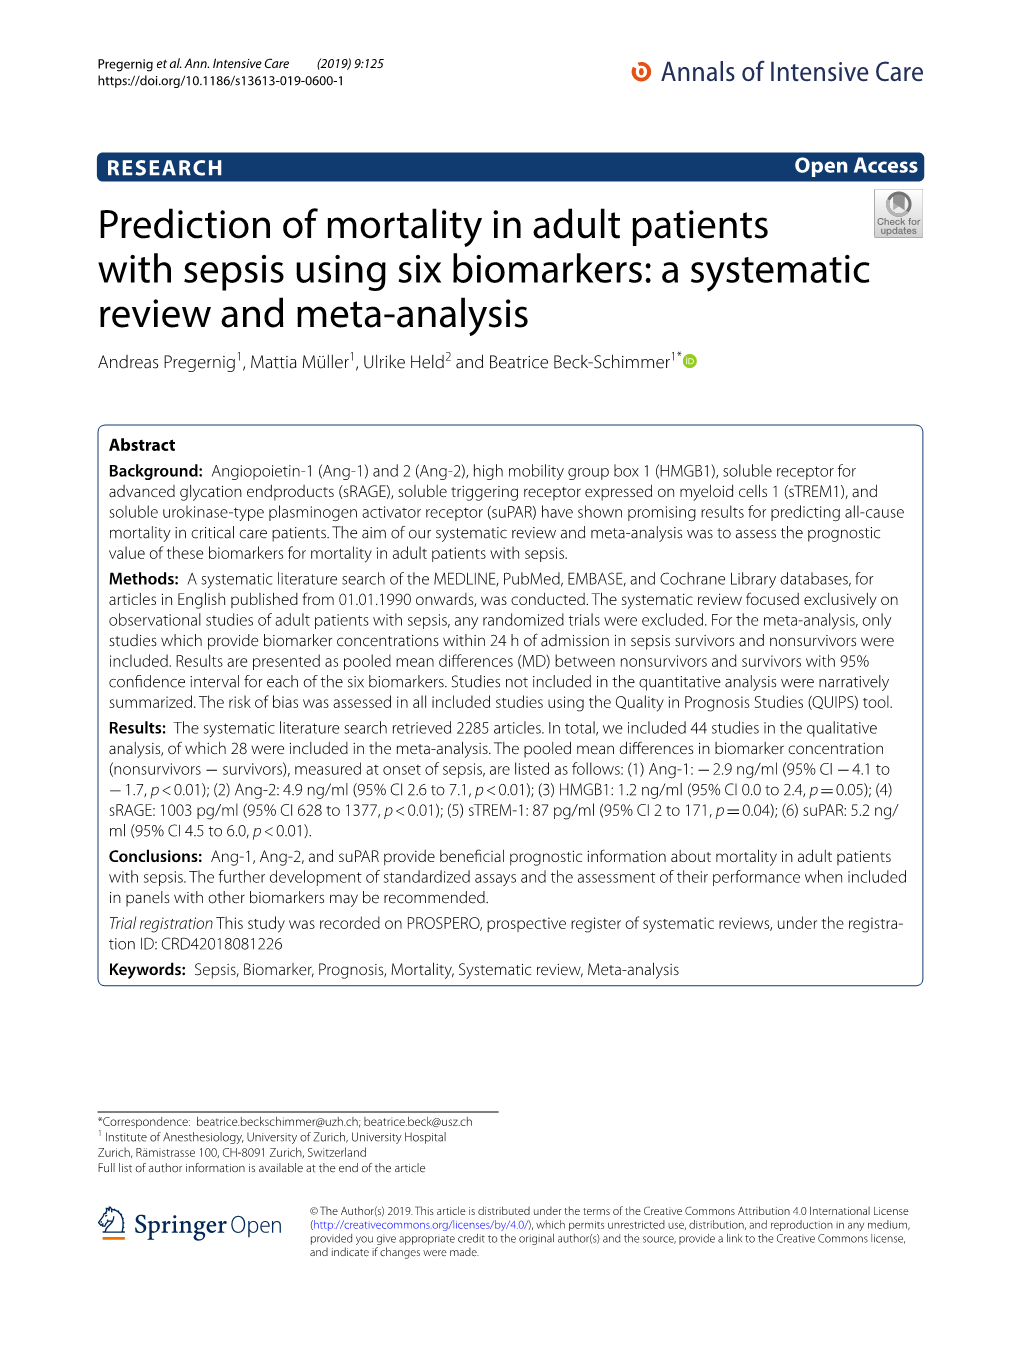 Prediction of Mortality in Adult Patients with Sepsis Using Six Biomarkers